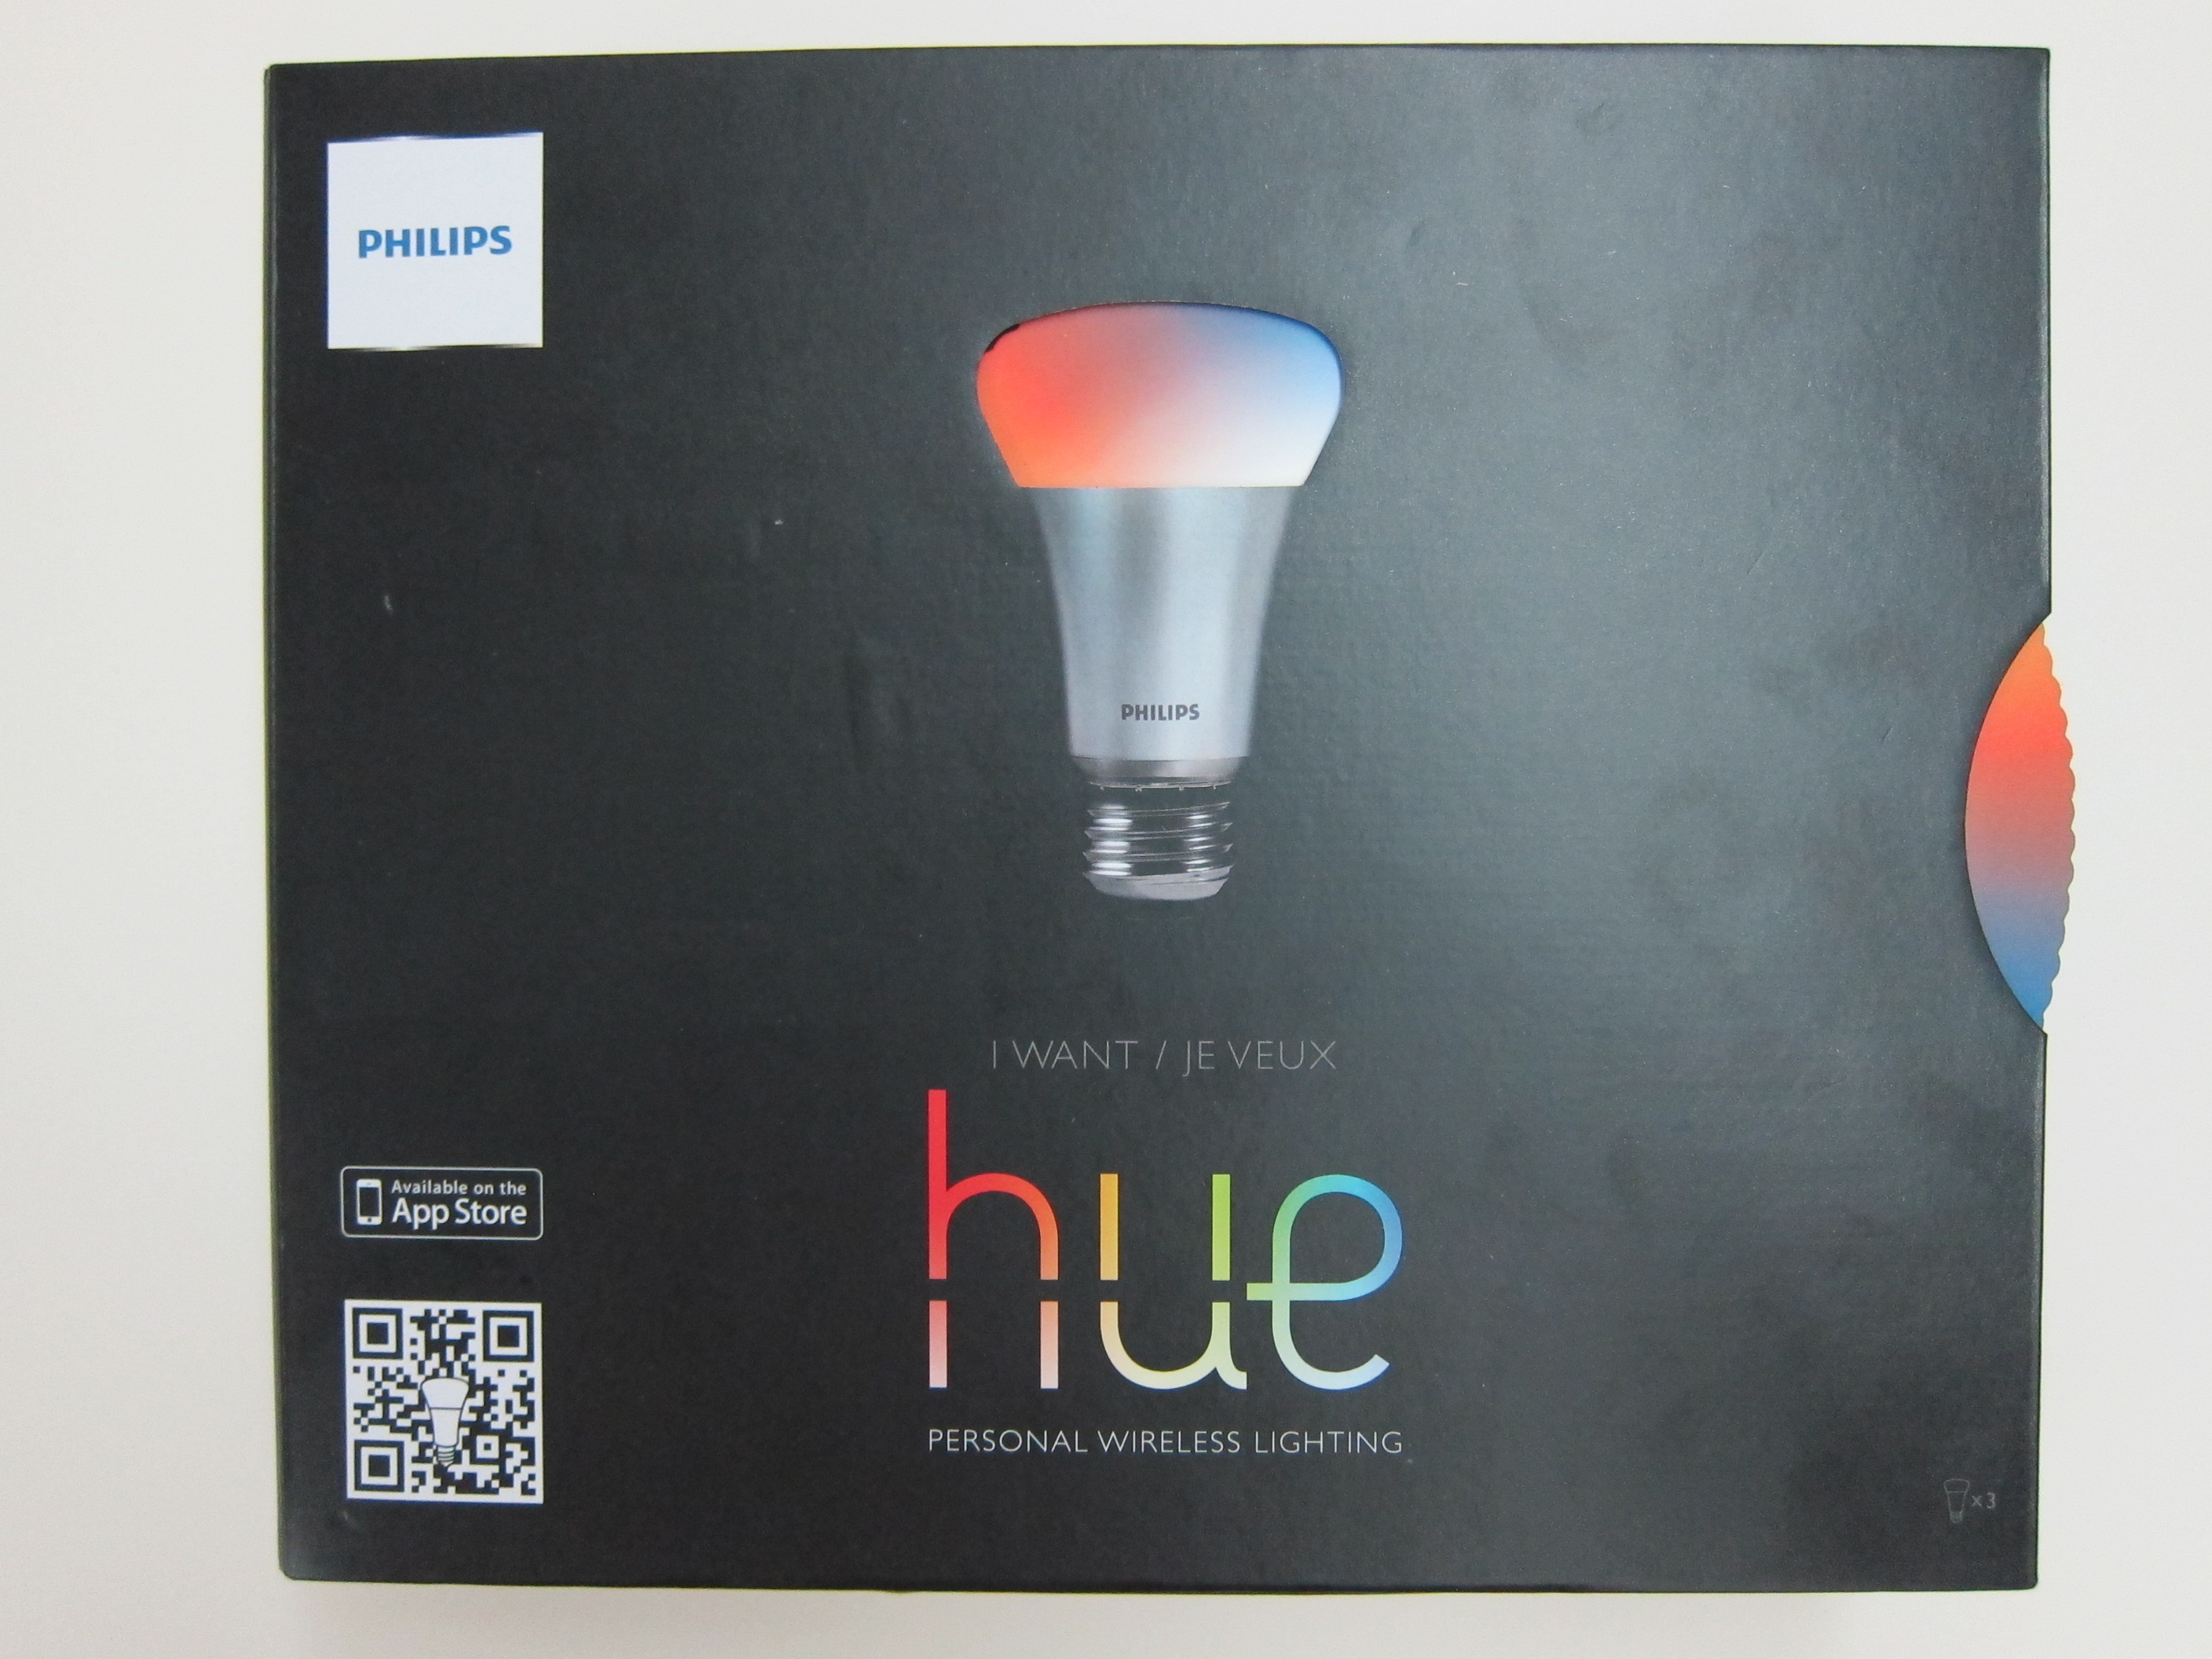 how does the philips hue work